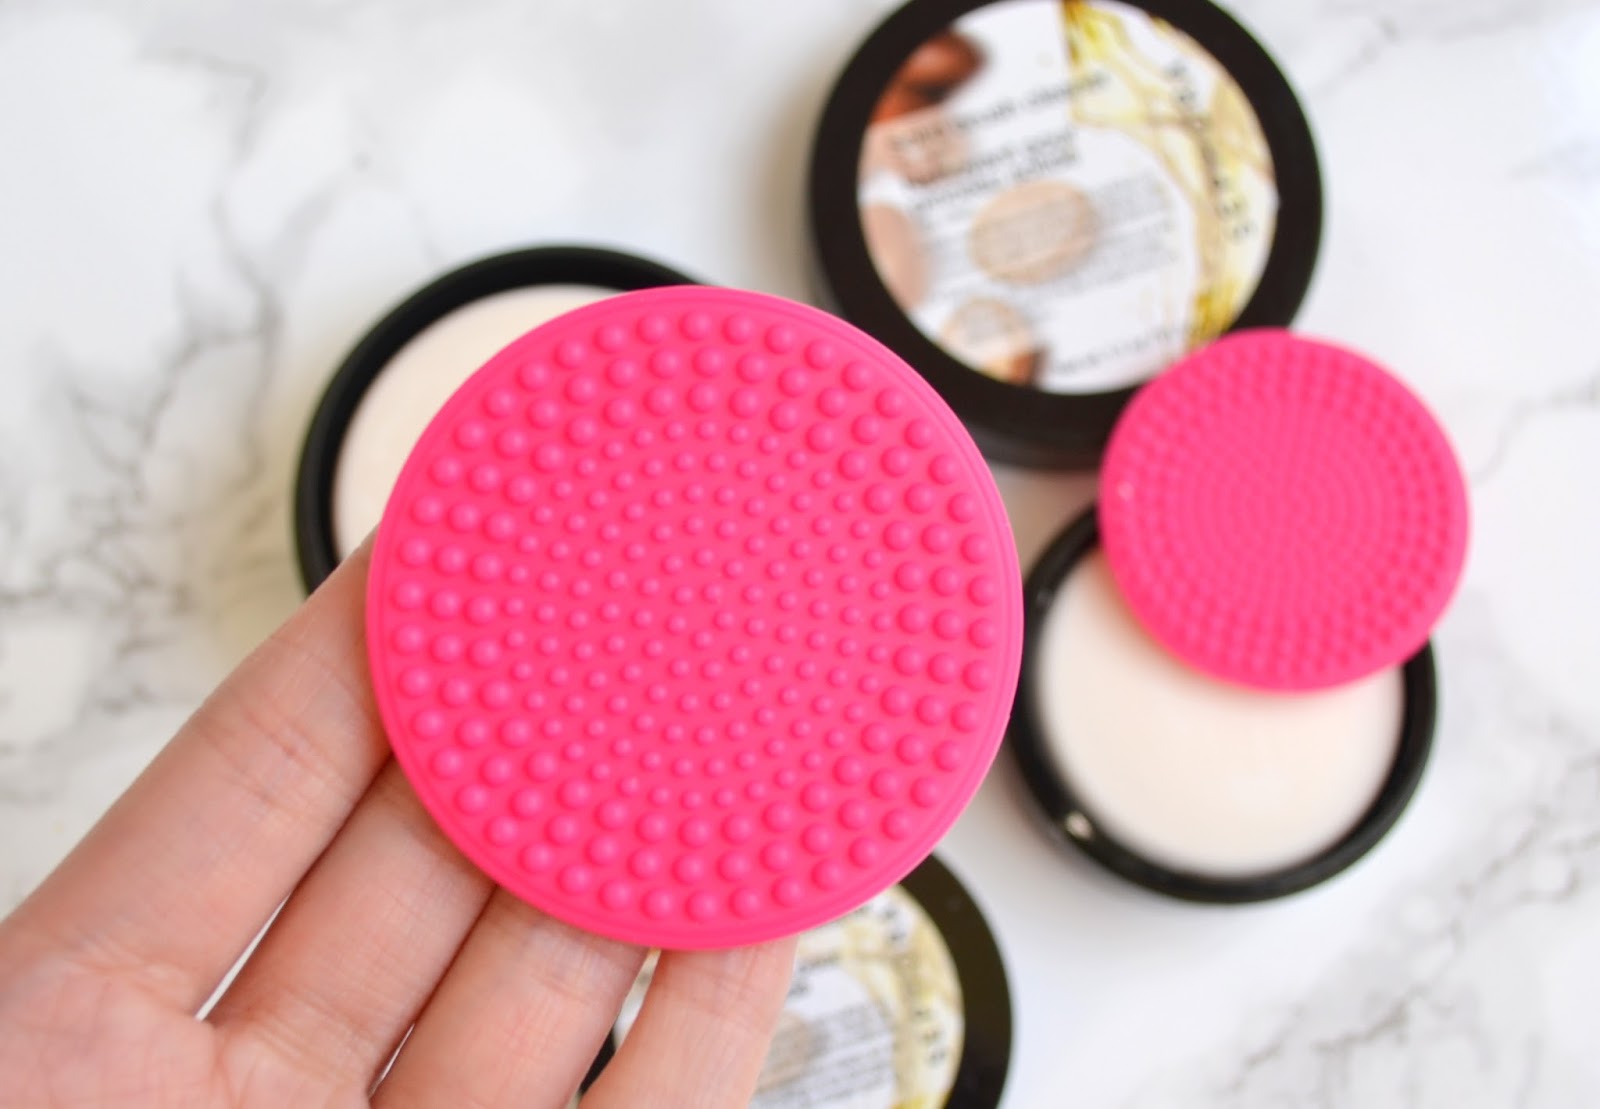 Makeup, Sephora Collection Solid Brush Cleaner (I LOVE THIS THING!), Cosmetic Proof